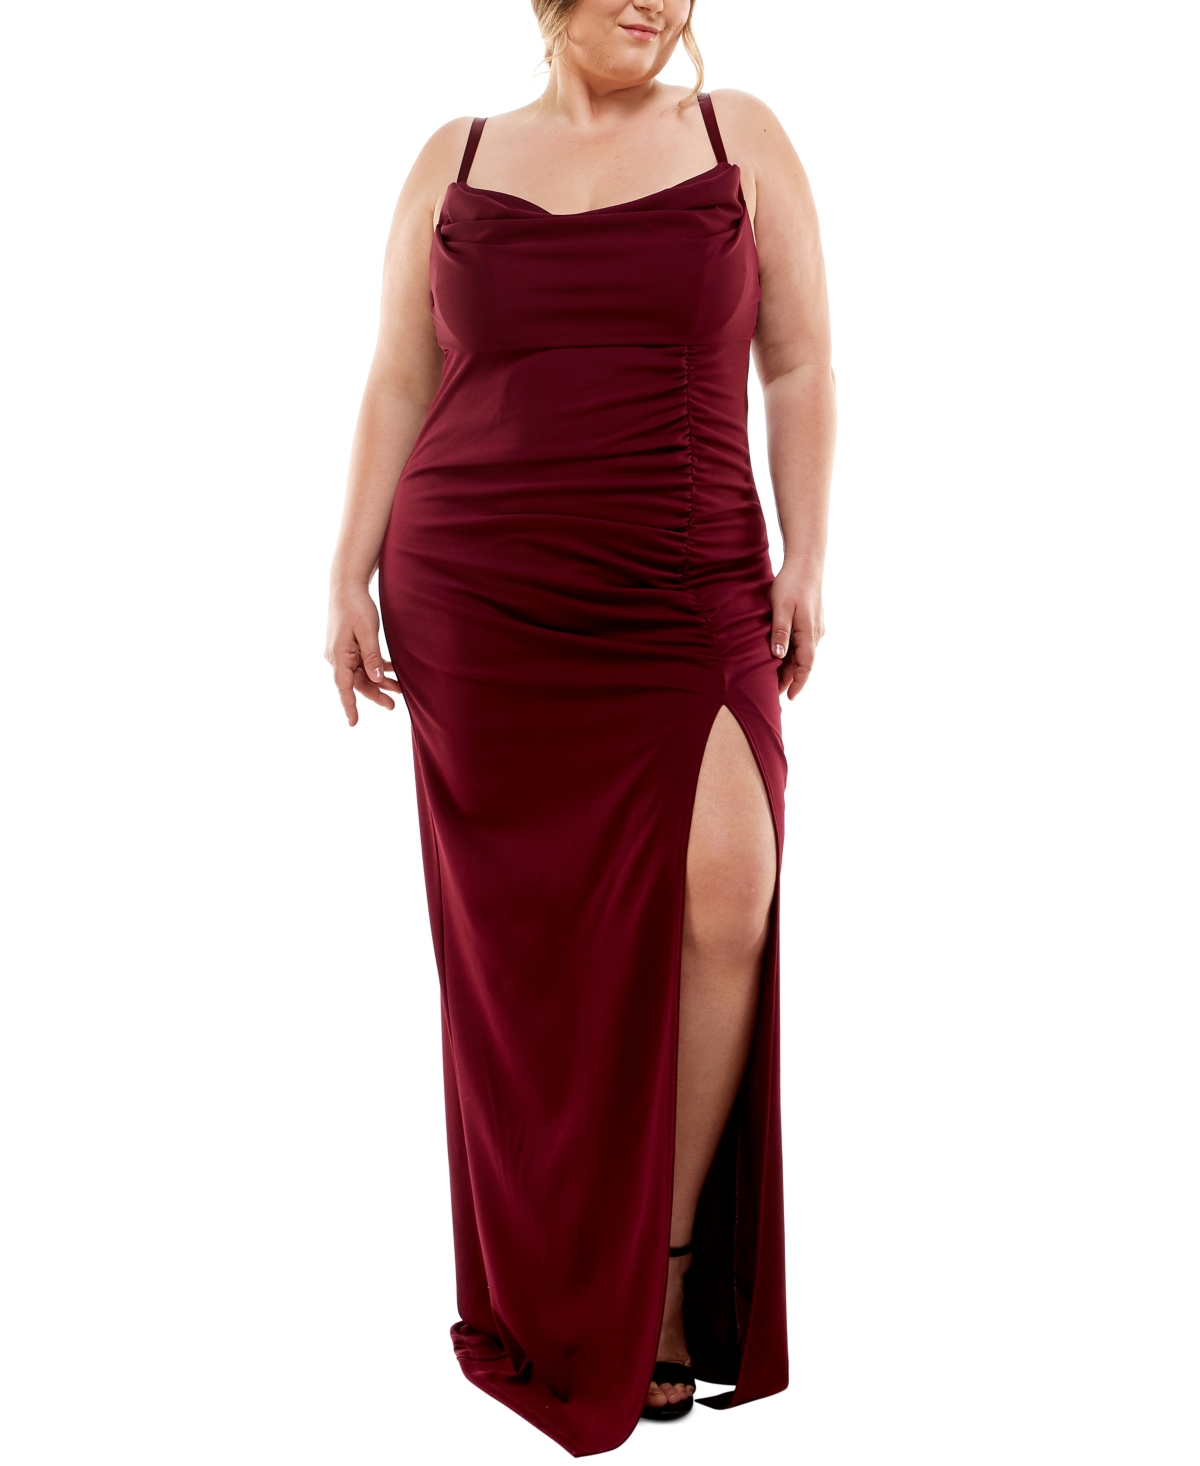 Trendy Plus Size Cowlneck Side-Ruched Maxi Dress, Created for Macy's - Black